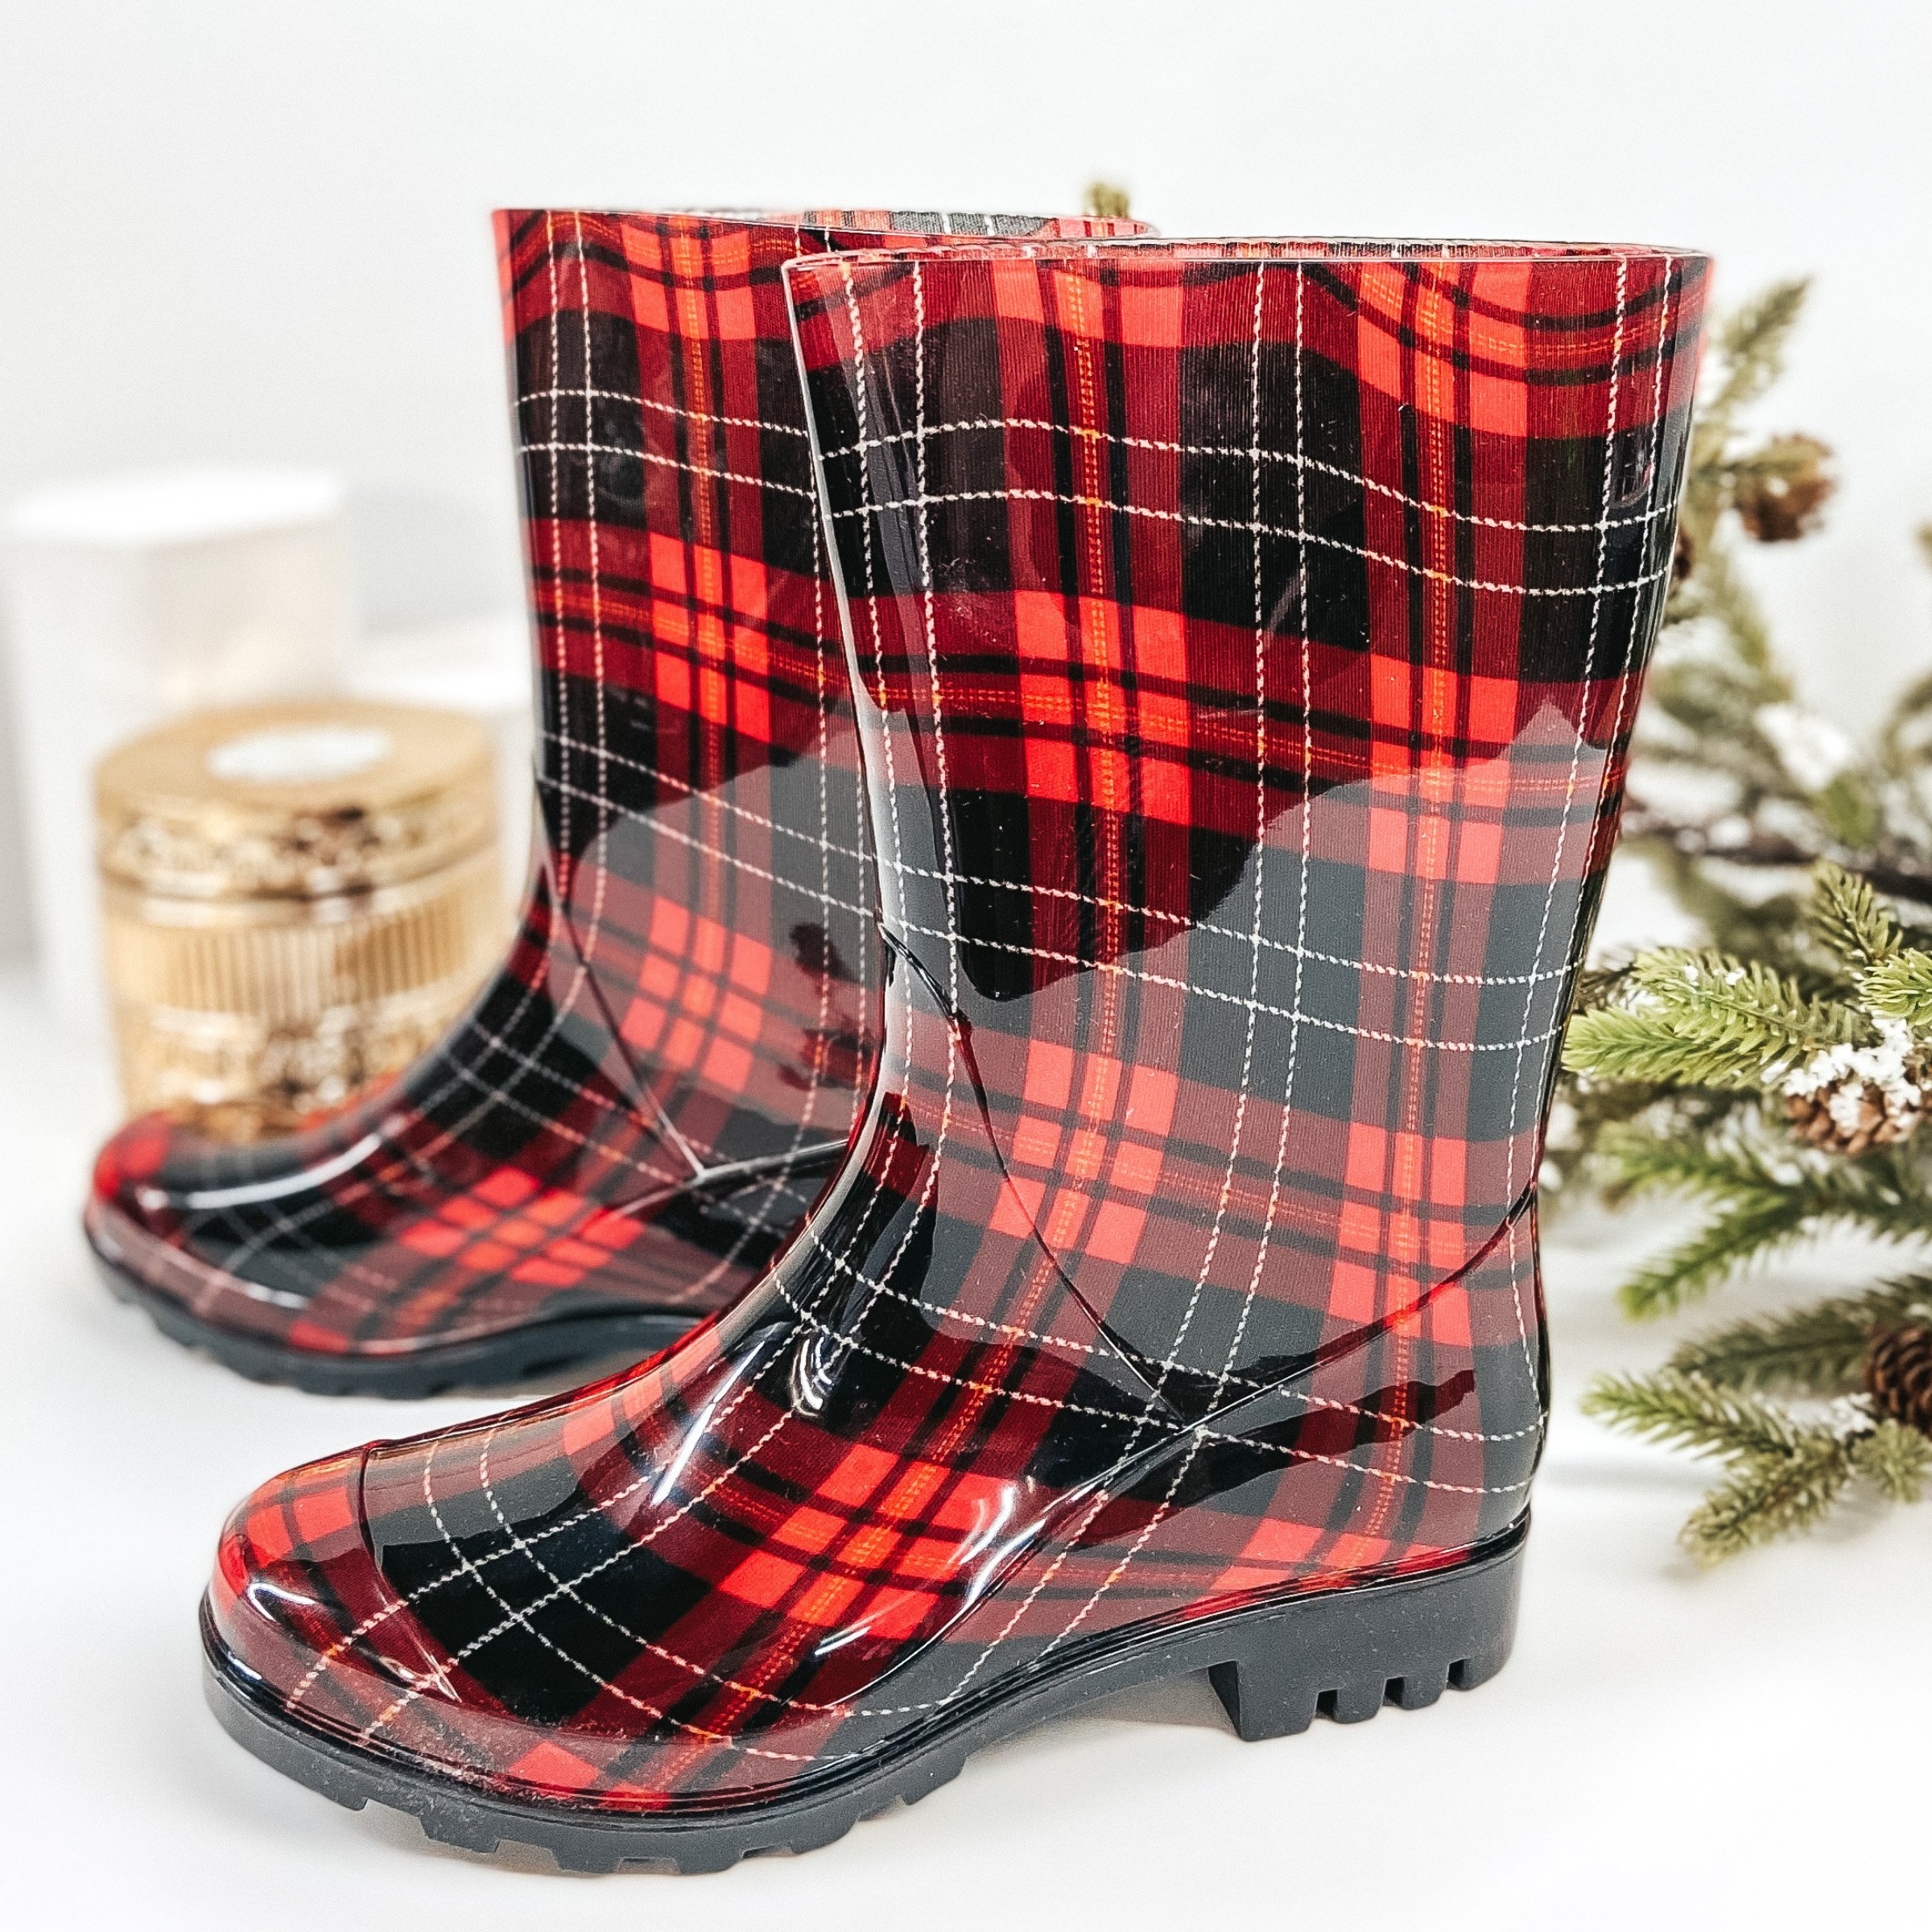 Red and black mid calf rubber boots. Pictured with garland and pinecones for season.